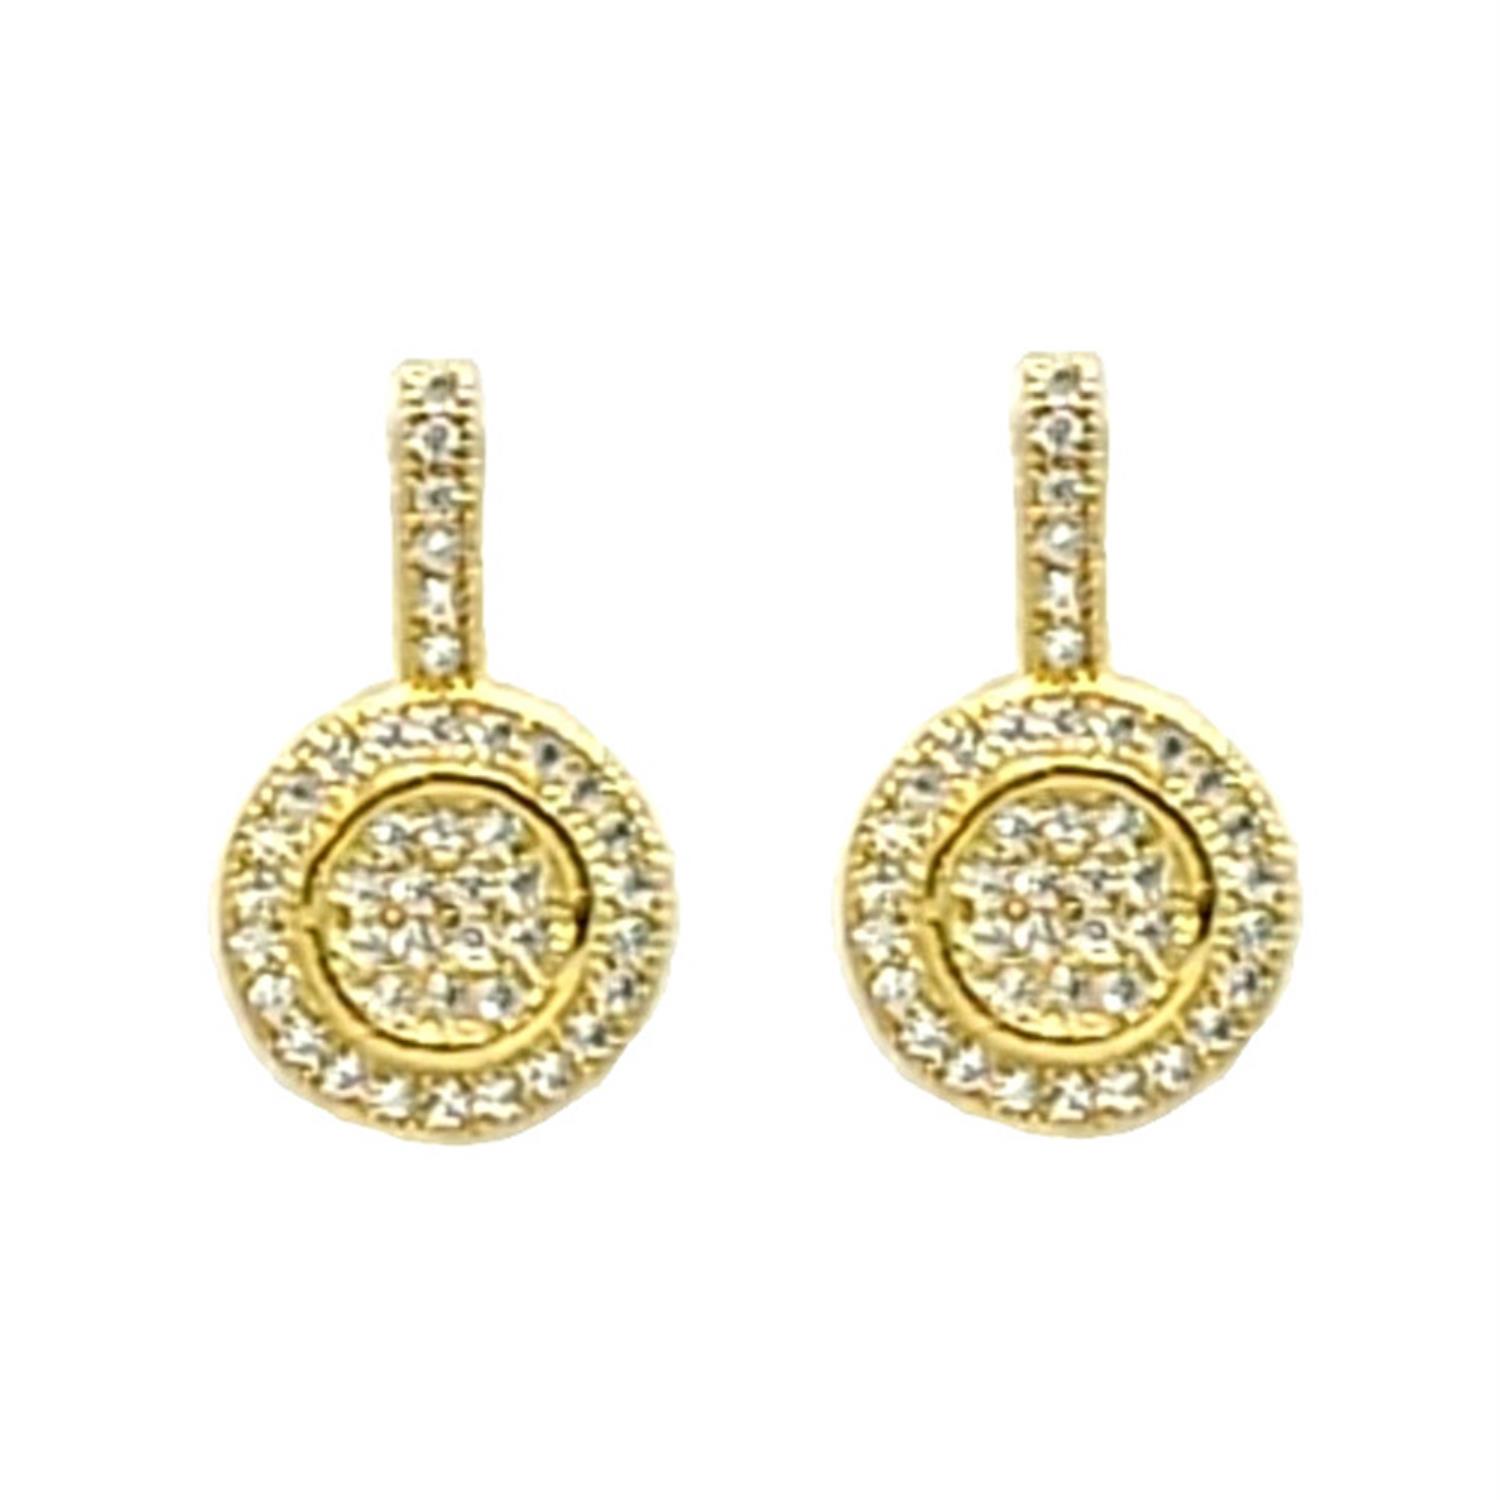 Round Crystal Earring Naughty Smile Fashion